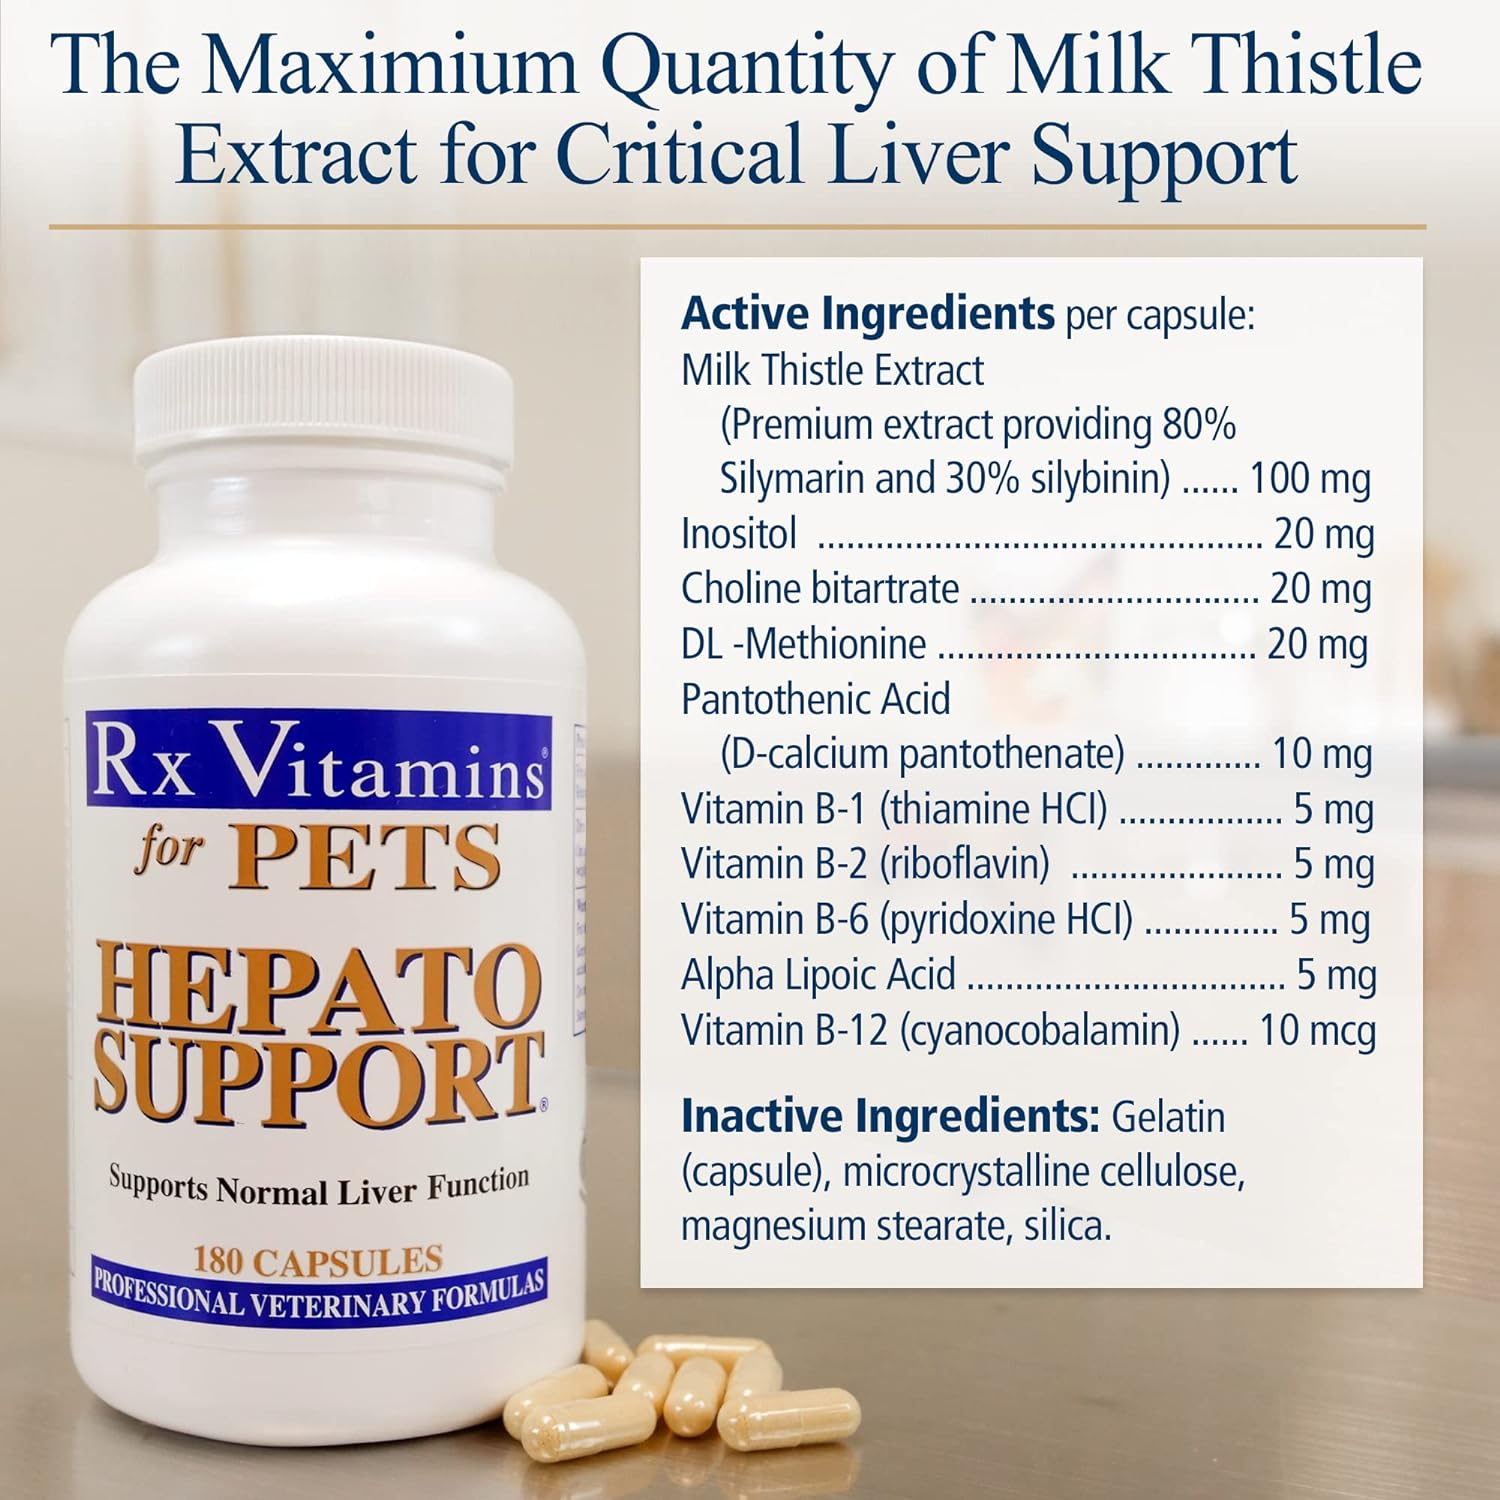 Rx Vitamins Hepato Support for Dogs & Cats - Milk Thistle Supplement for Pets - 100mg Milk Thistle for Healthy Liver Function - Silymarin Capsules for Pets - 180 ct. : Pet Supplies